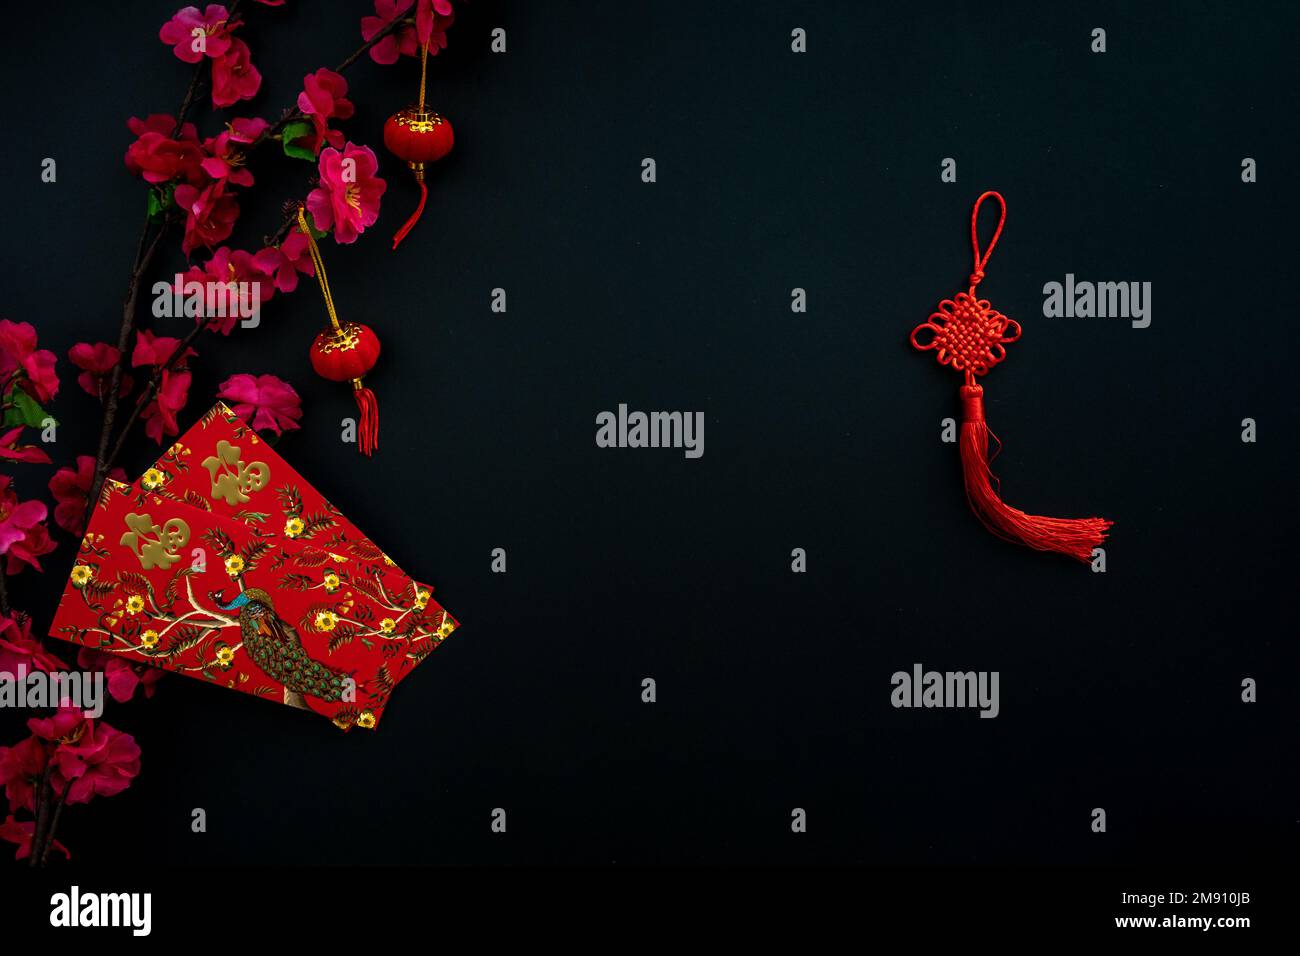 Chinese lunar new year decoration over black background. Flat lay concept with red envelope and plum flower decoration. Stock Photo